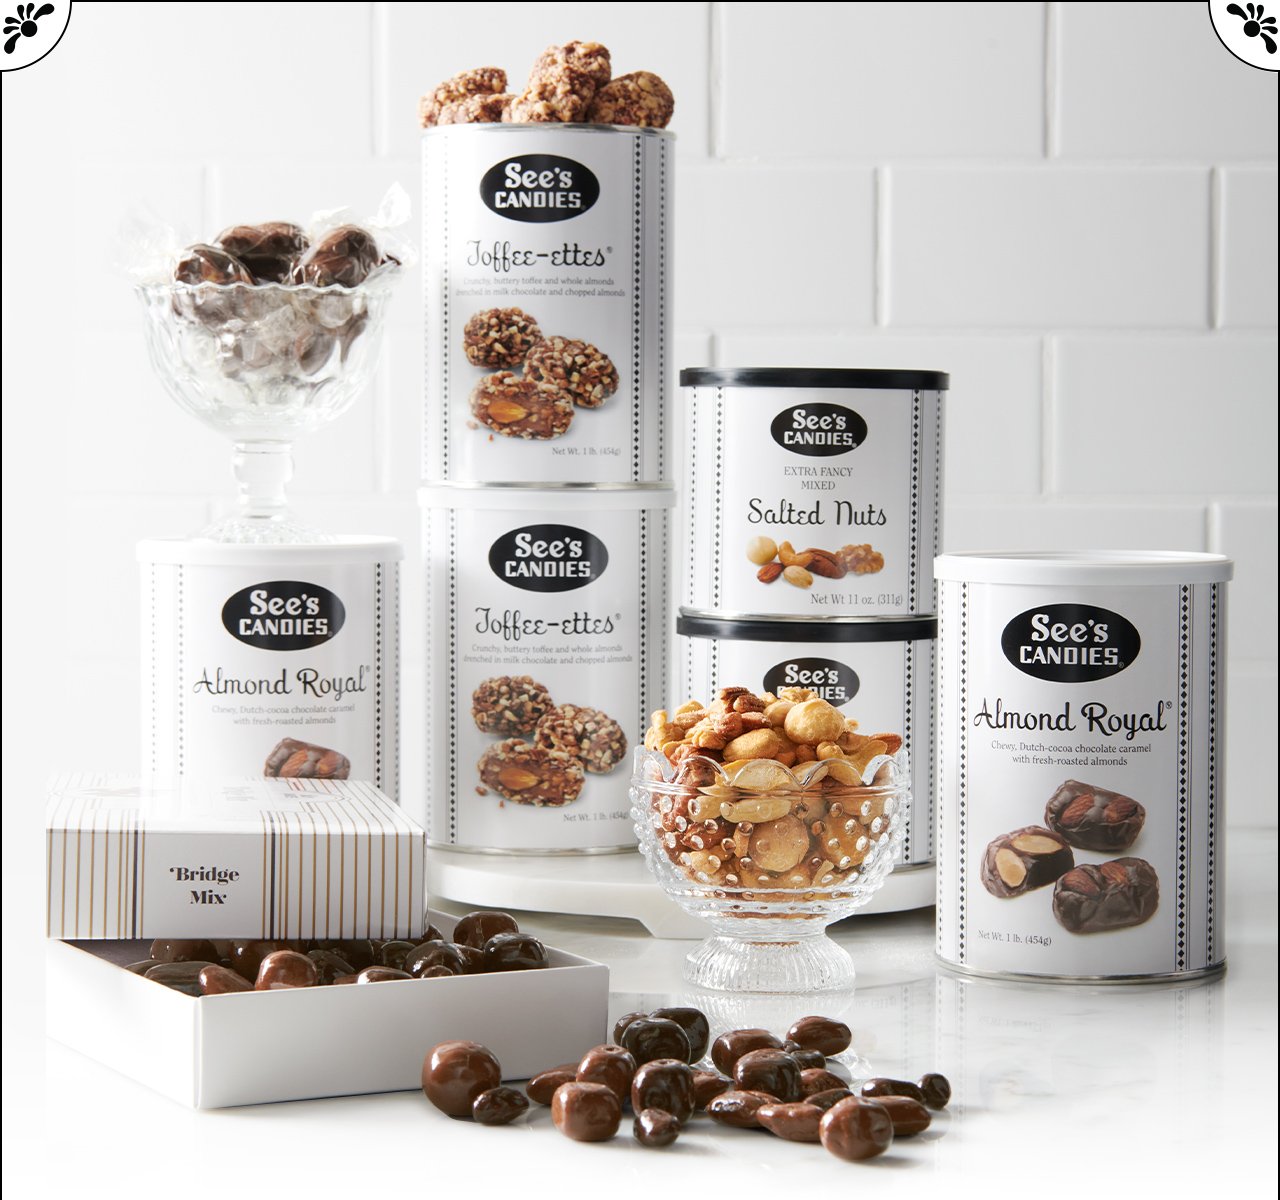 See's Candies, Inc.: Our Top Crunchy, Nutty Snacks 🥜 | Milled